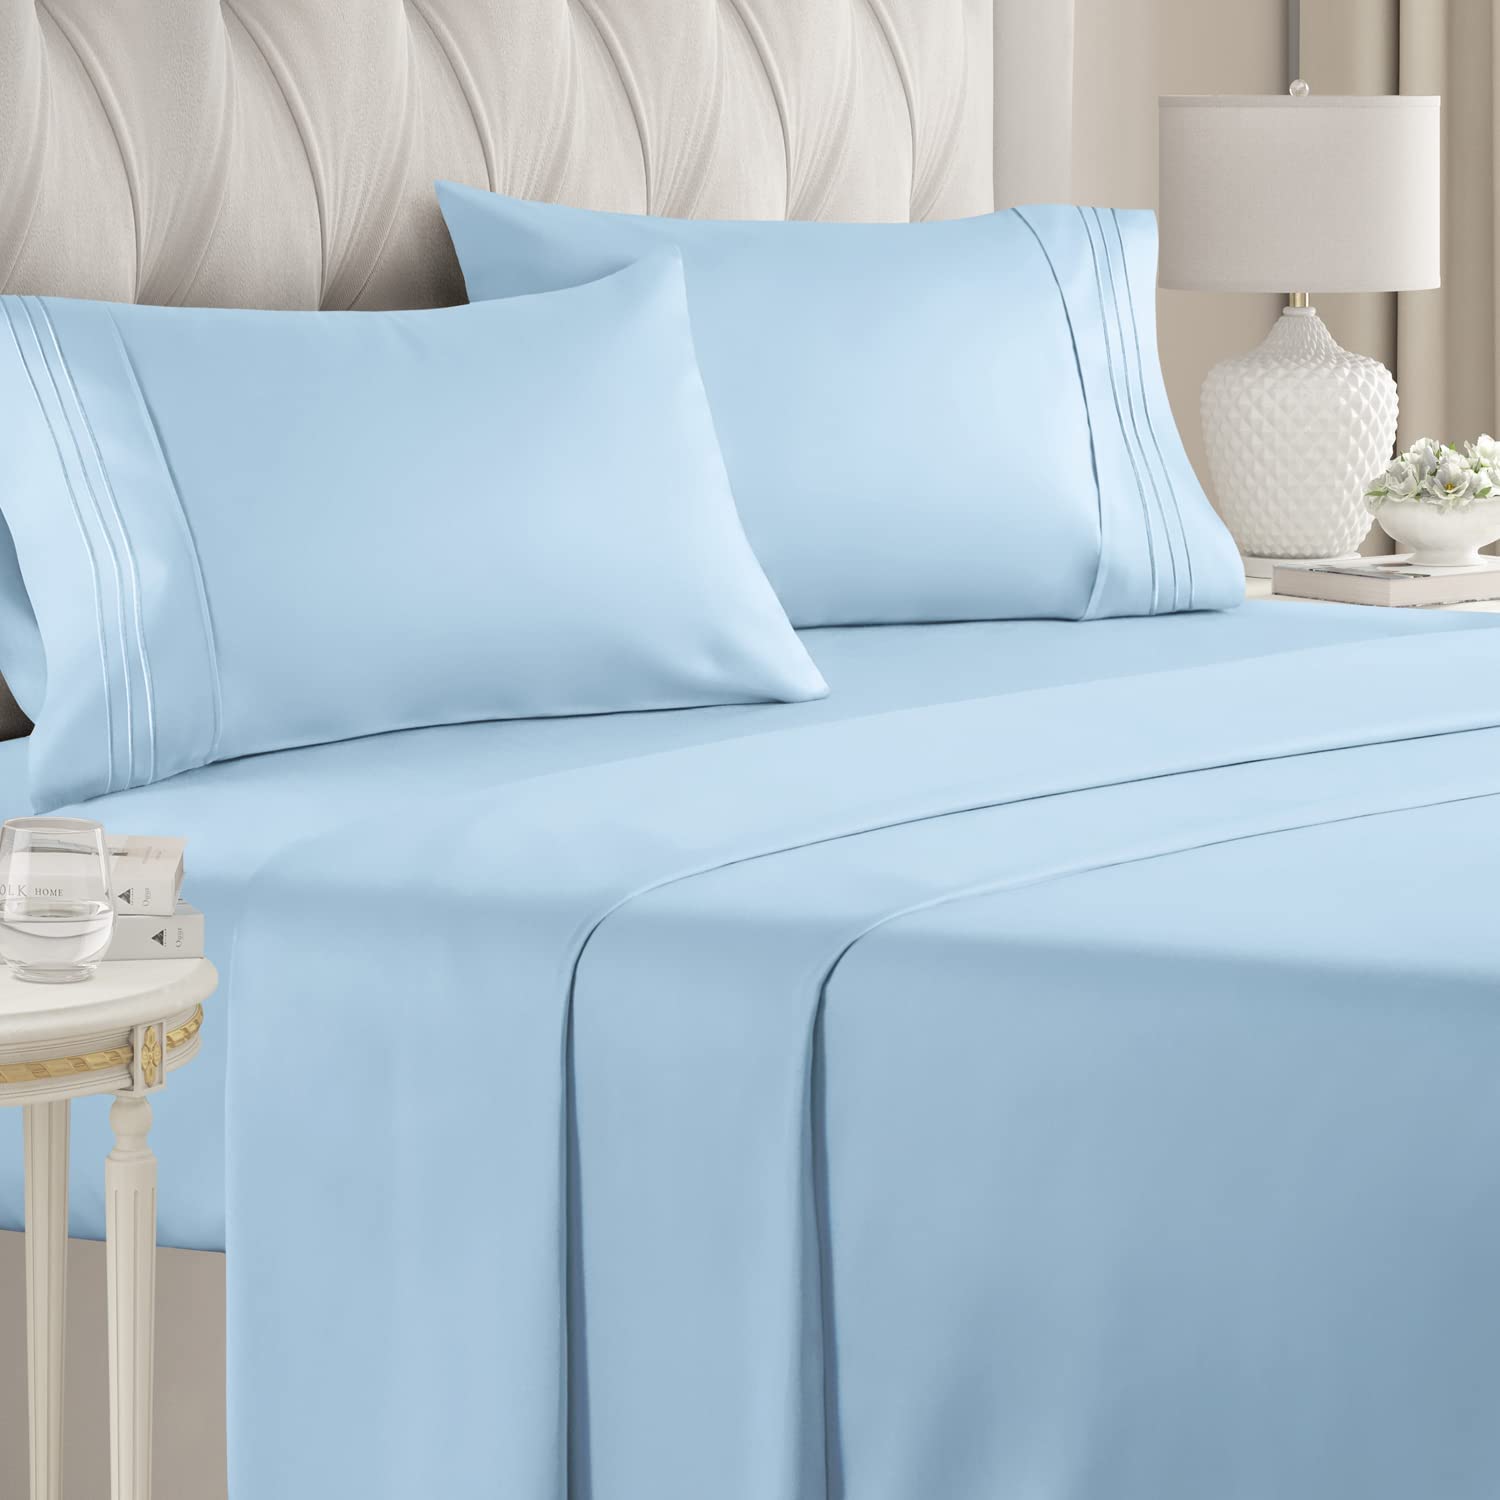 Twin-XL Flat Sheet Blue Egyptian Cotton 1000 Thread Count at- Egyptianhomelinens.com